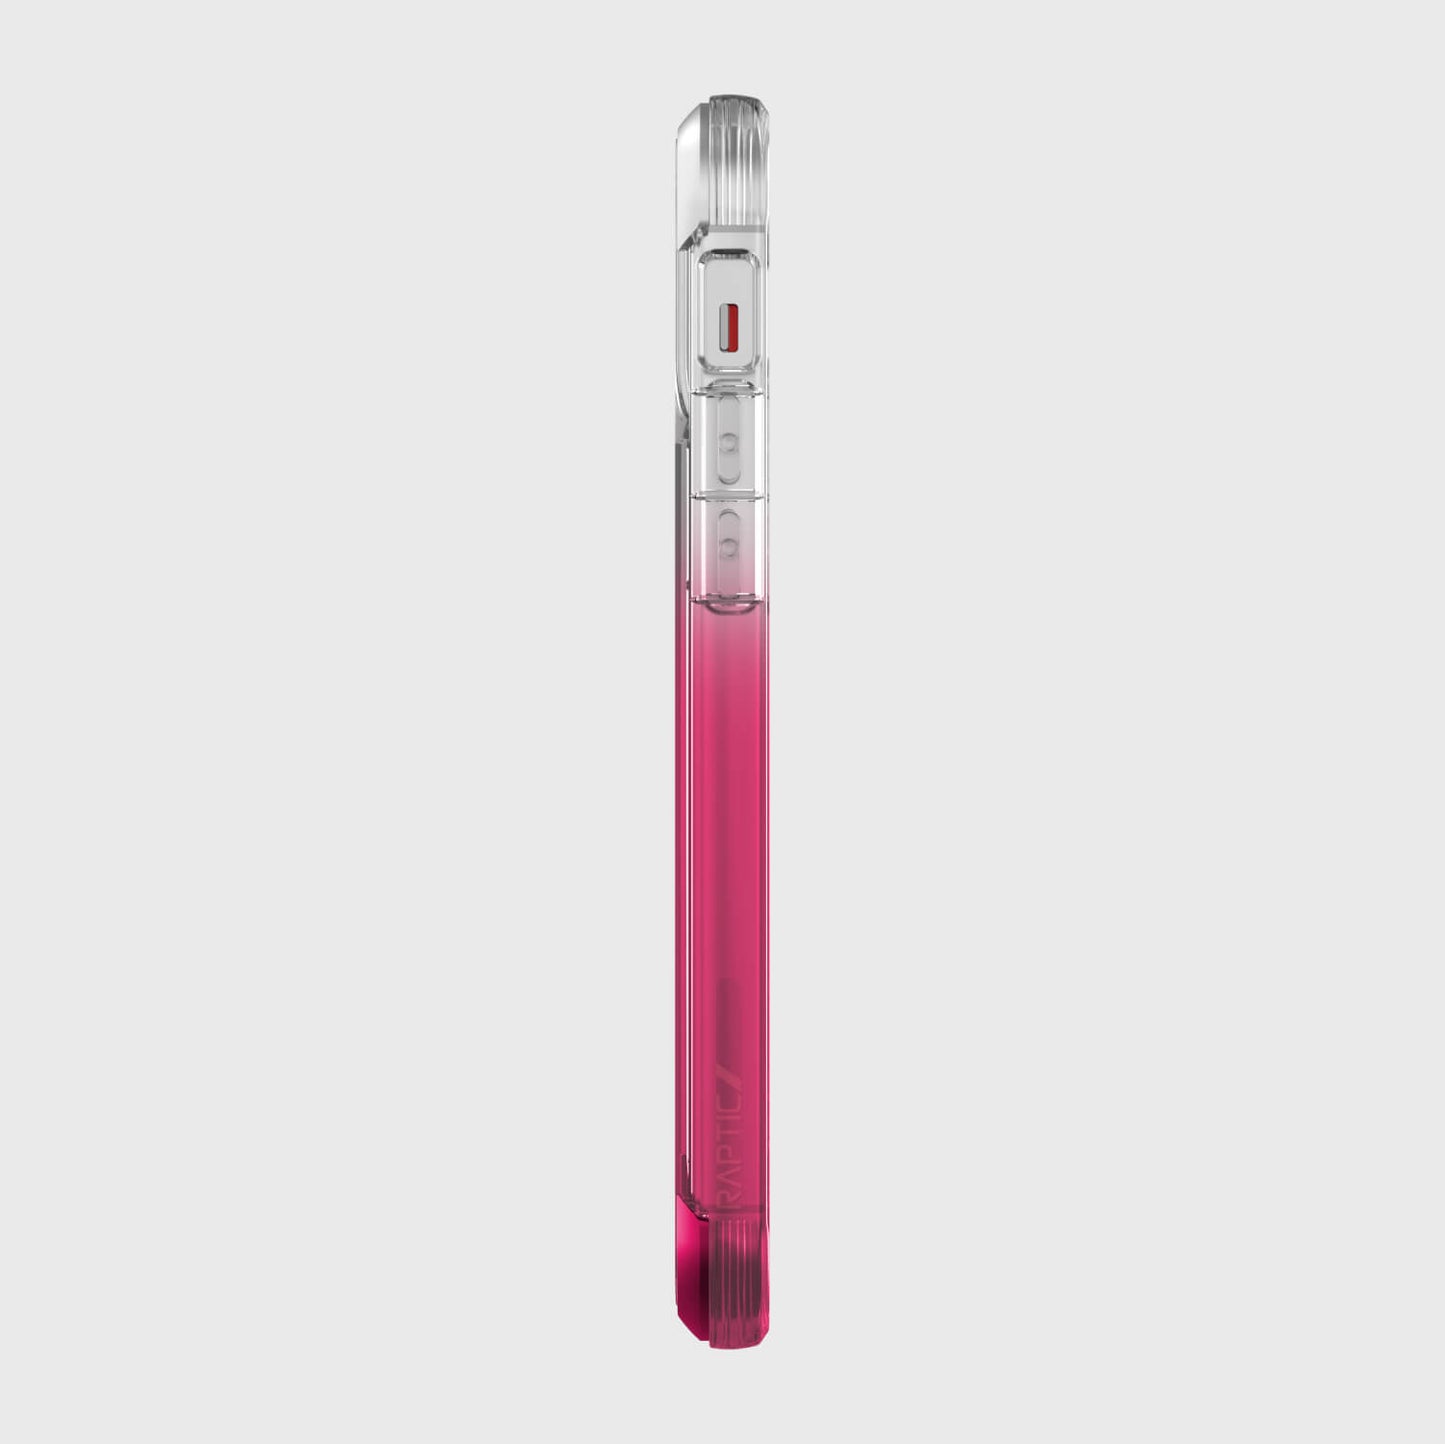 A bottle of pink liquid on a white background featuring Raptic Air and the iPhone 12 & iPhone 12 Pro Case - AIR.